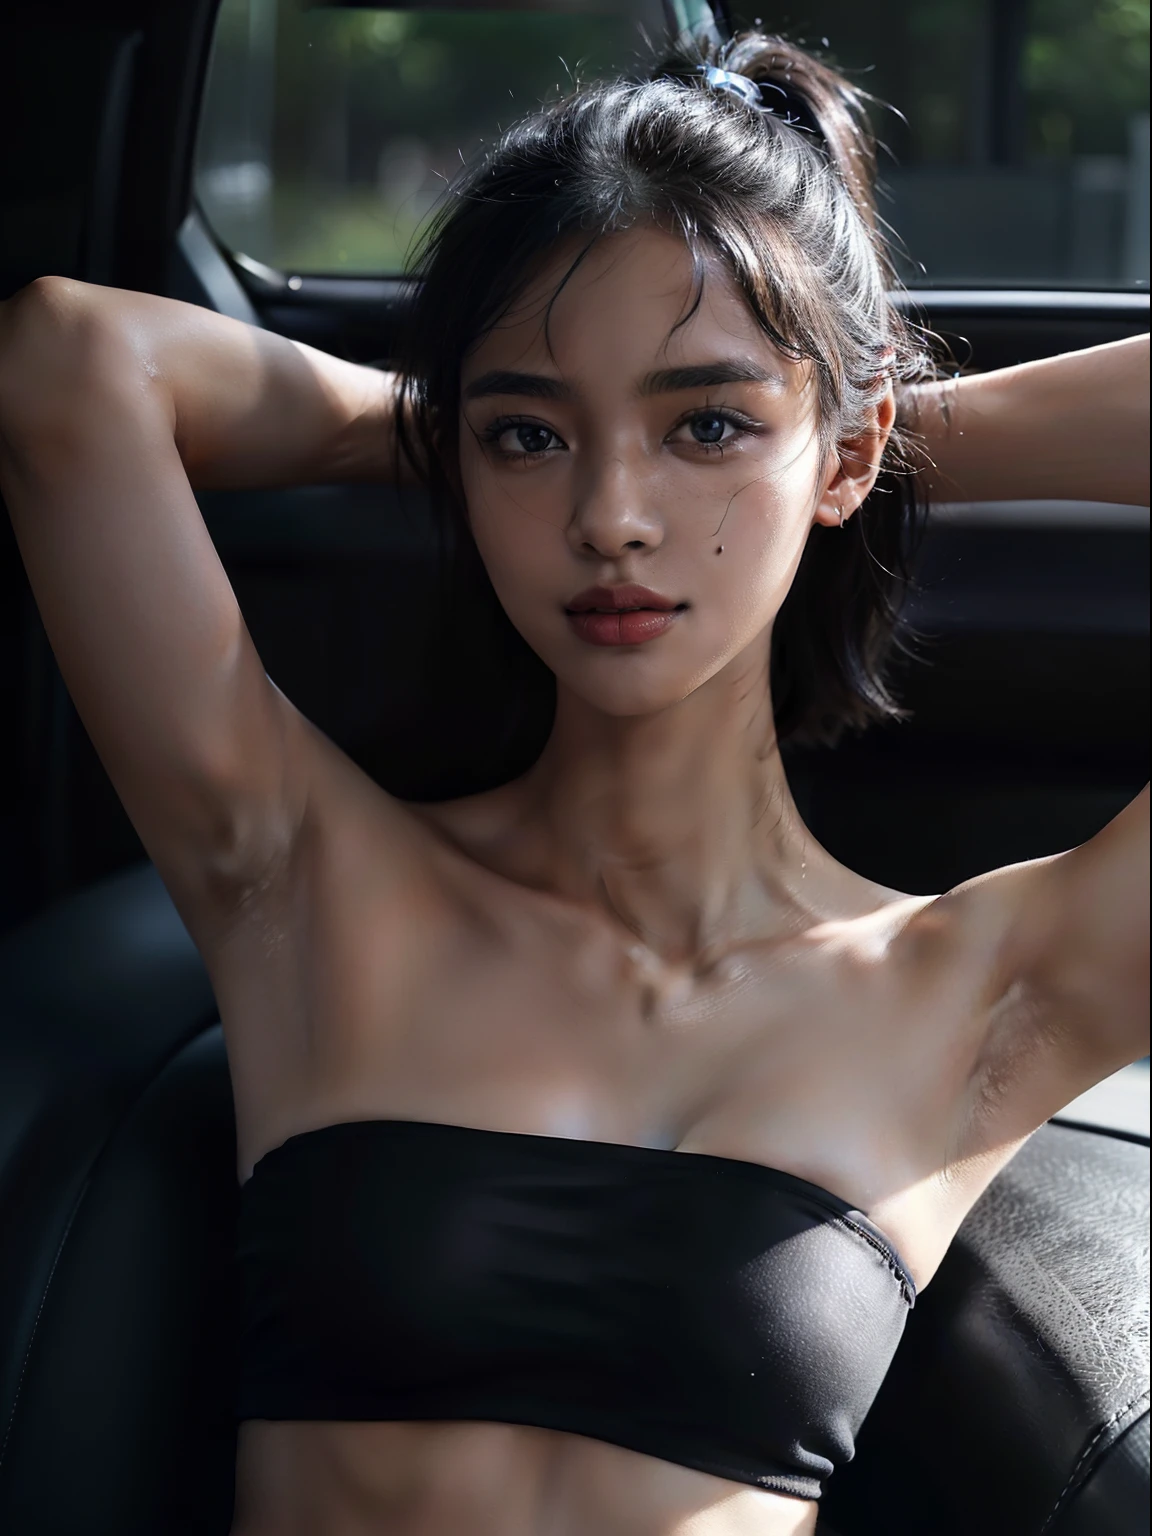 ((Black skin much darker than in the photo、Black armpits、Green eyes、She has the blackest black skin、The blackest black skin、Armpit、Black wrinkled armpits、I'm in the car、inside of a car、shiny blackest skin!、 beautiful dense black skin,、Upper body only、red lipsticks、Armpits are the blackest、Light illuminating the armpits、Pitch black skin like a black man！、Light falls on the armpits、Illuminates the armpits very brightly、Pitch black armpit skin!、Strapless bra、Model at 15 years old、Realistic armpit wrinkles、Glossy armpits、improve the appearance of armpits、Armpit、Take a pose with armpits visible、upper body closeup、A smile、Detailed black shiny armpits、Realistic black shiny armpits、Sweaty and glowing body、Detailed armpit wrinkles、full of sweat、Black detailed black armpits、Very black skin color、Caucasian and half-very dark-skinned woman、Black skin beauty、Black skin、Glossy armpits、Show me your armpits in the car、Dark-skinned woman in black strapless bra, Smiling))、(high-ponytail Hairstyle、Caucasian and very black dark-skinned woman、8K、Green eyes、Caucasians with very dark skin）、Underwear models,Strapless bra、Black panties、, 15yo student、Women with the darkest skin))、Photorealistic perfect body、In the car in armpit pose、Best Quality, Armpits, Arms up, Strapless Bras、 in car、short-haired、Realistic, 8K、Glossy armpits、glowy skin、((Glossy armpits、Tecateca skin、Black skin、Black skin、detailed armpit、Skin shiny with sweat、Glossy armpits、In the car、inside of a car)) 1 girl in